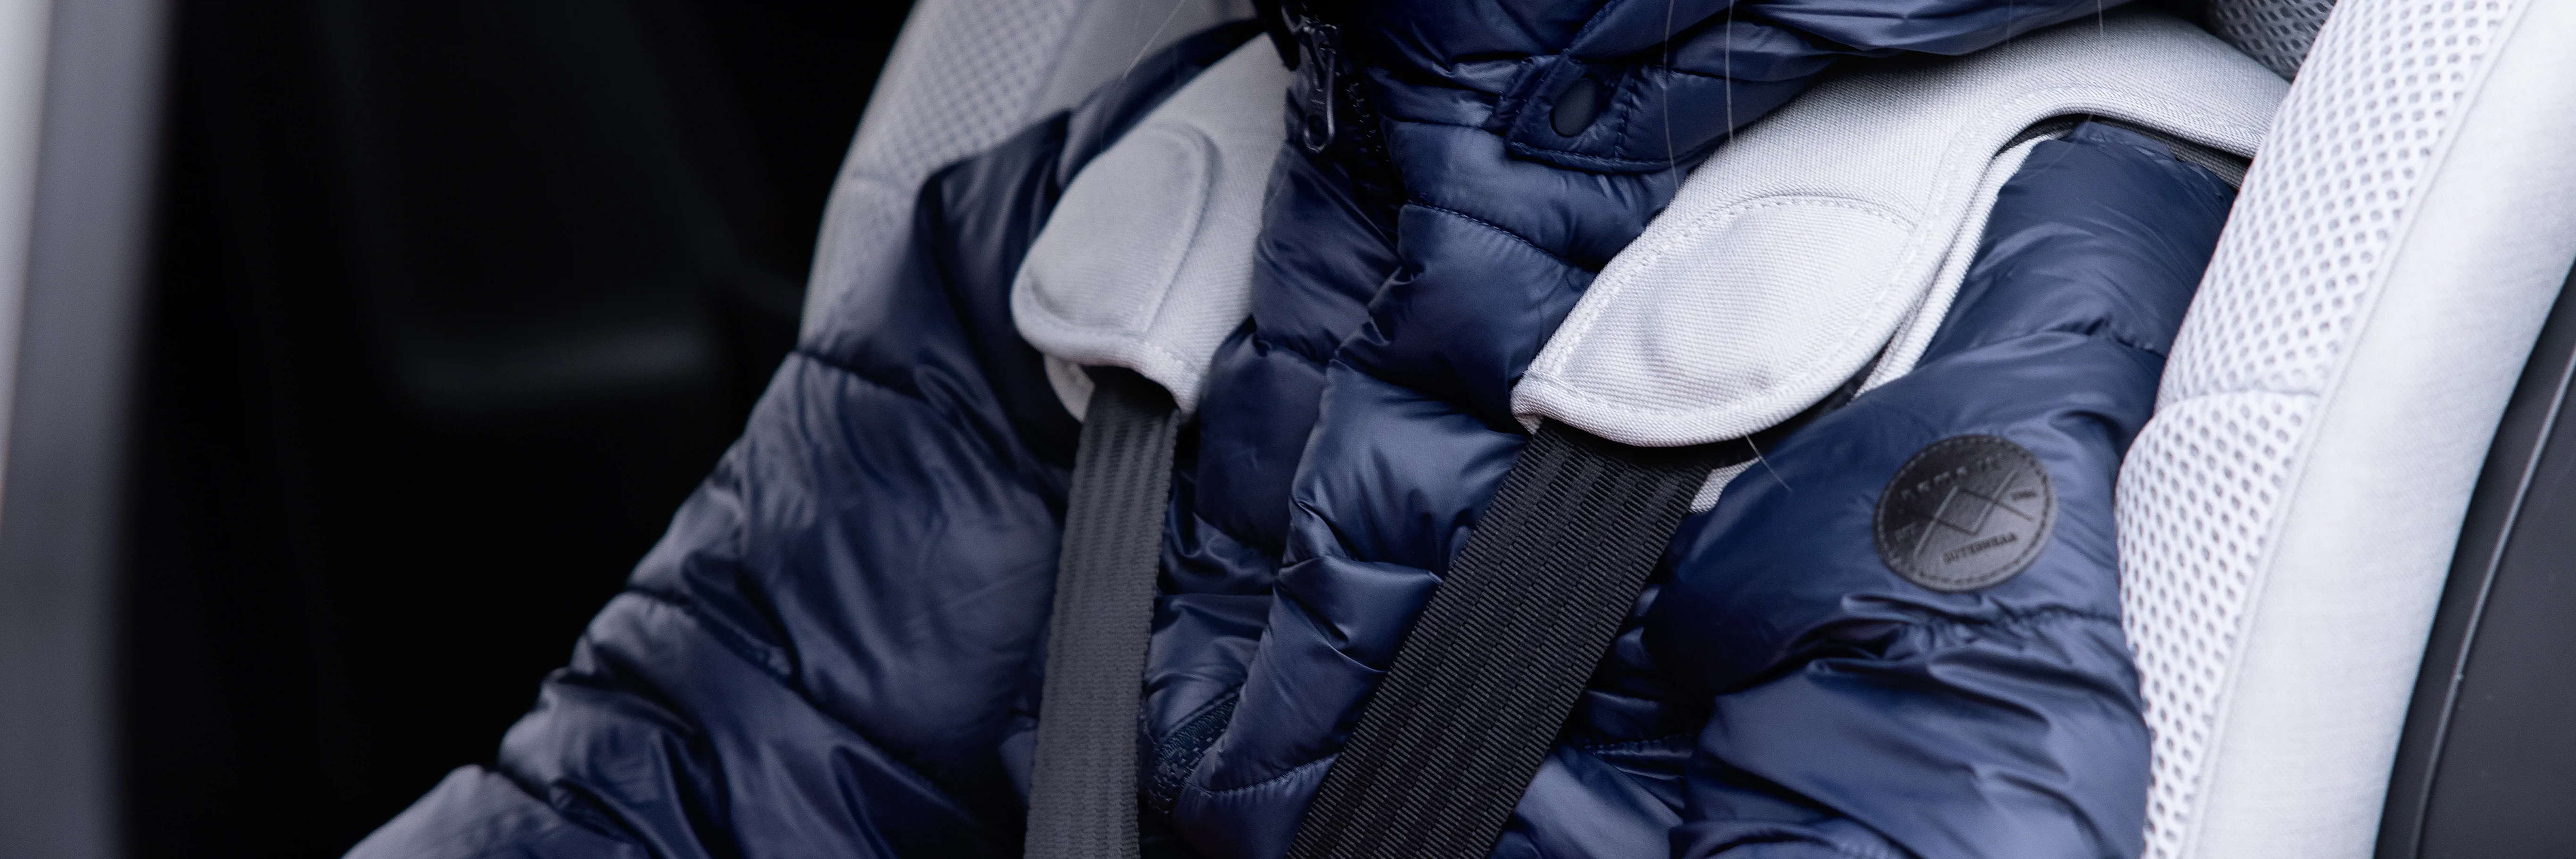 Winter Coats Can Interfere With Car Seat Safety